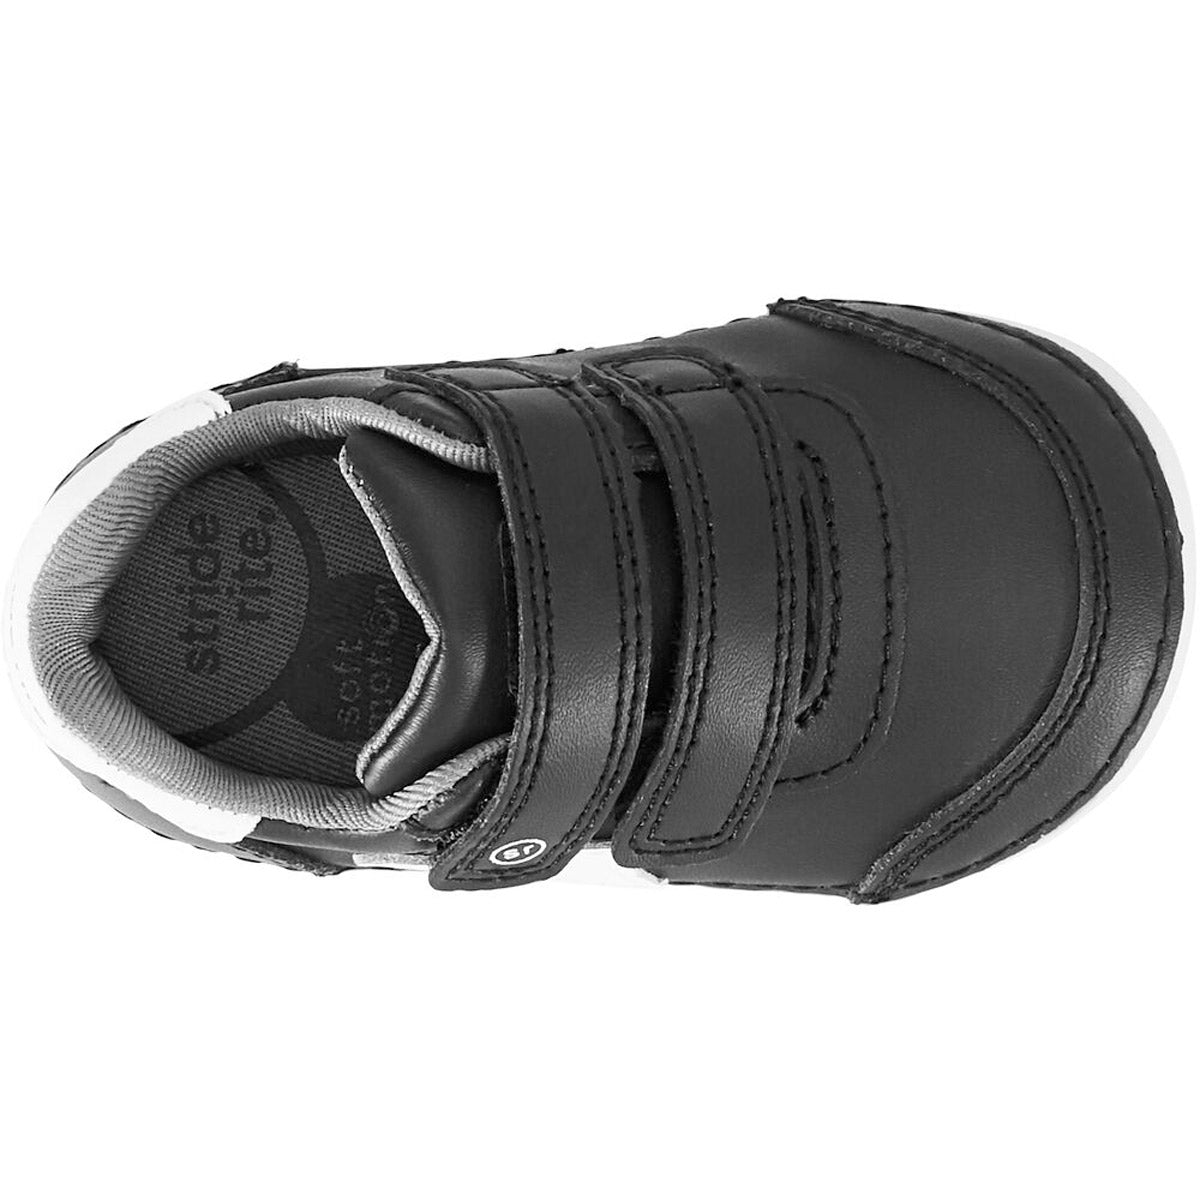 A single Stride Rite SM Kennedy Black kids shoe with double hook and loop closure viewed from above.